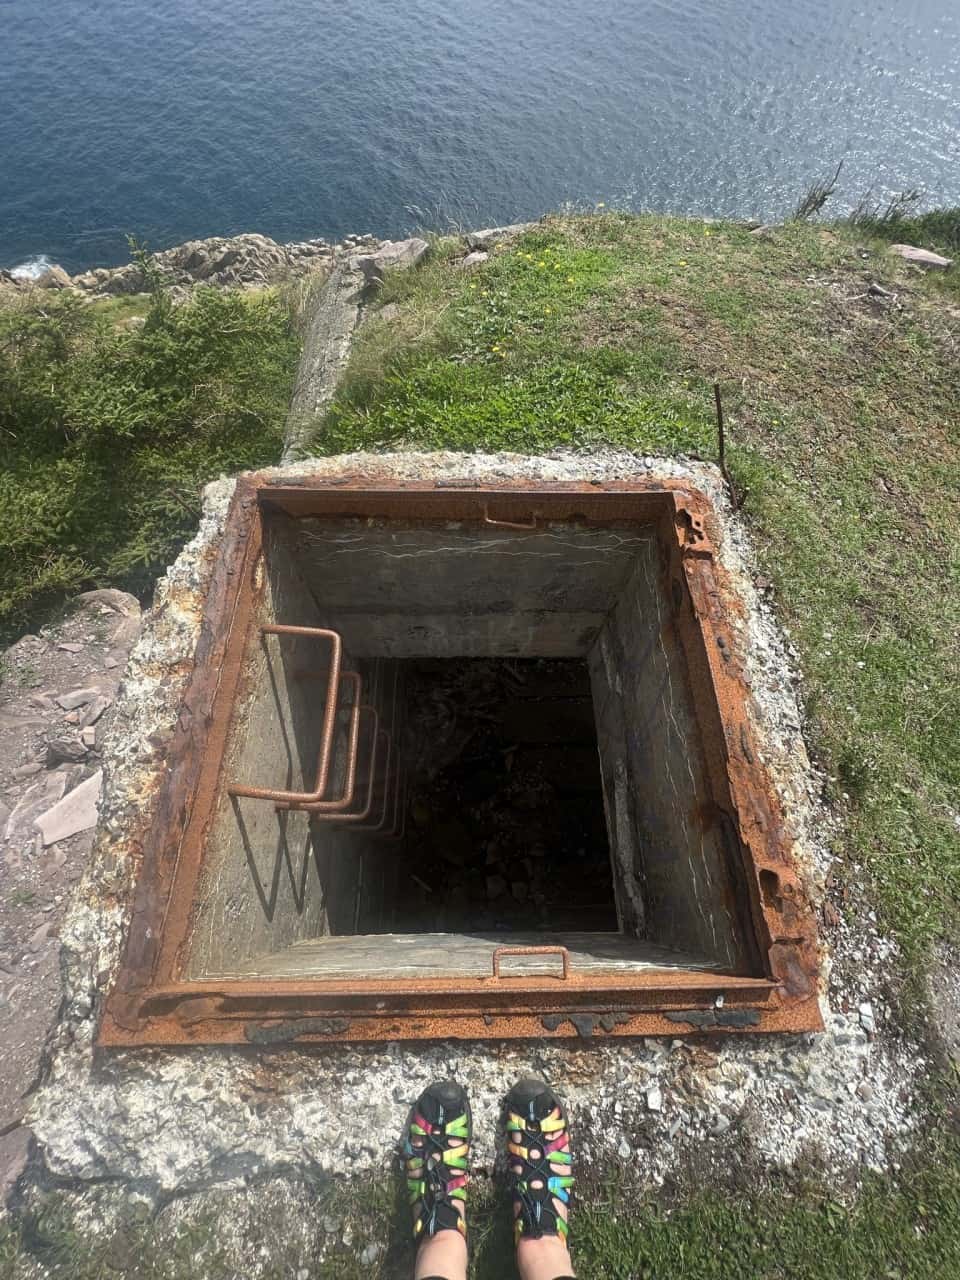 World War II Observation Station, St. John's, East Coast Trail, Sugar Loaf Path - The observation station looks out over the cliff, but the entryway from above, that you see here, is how you get into the station.